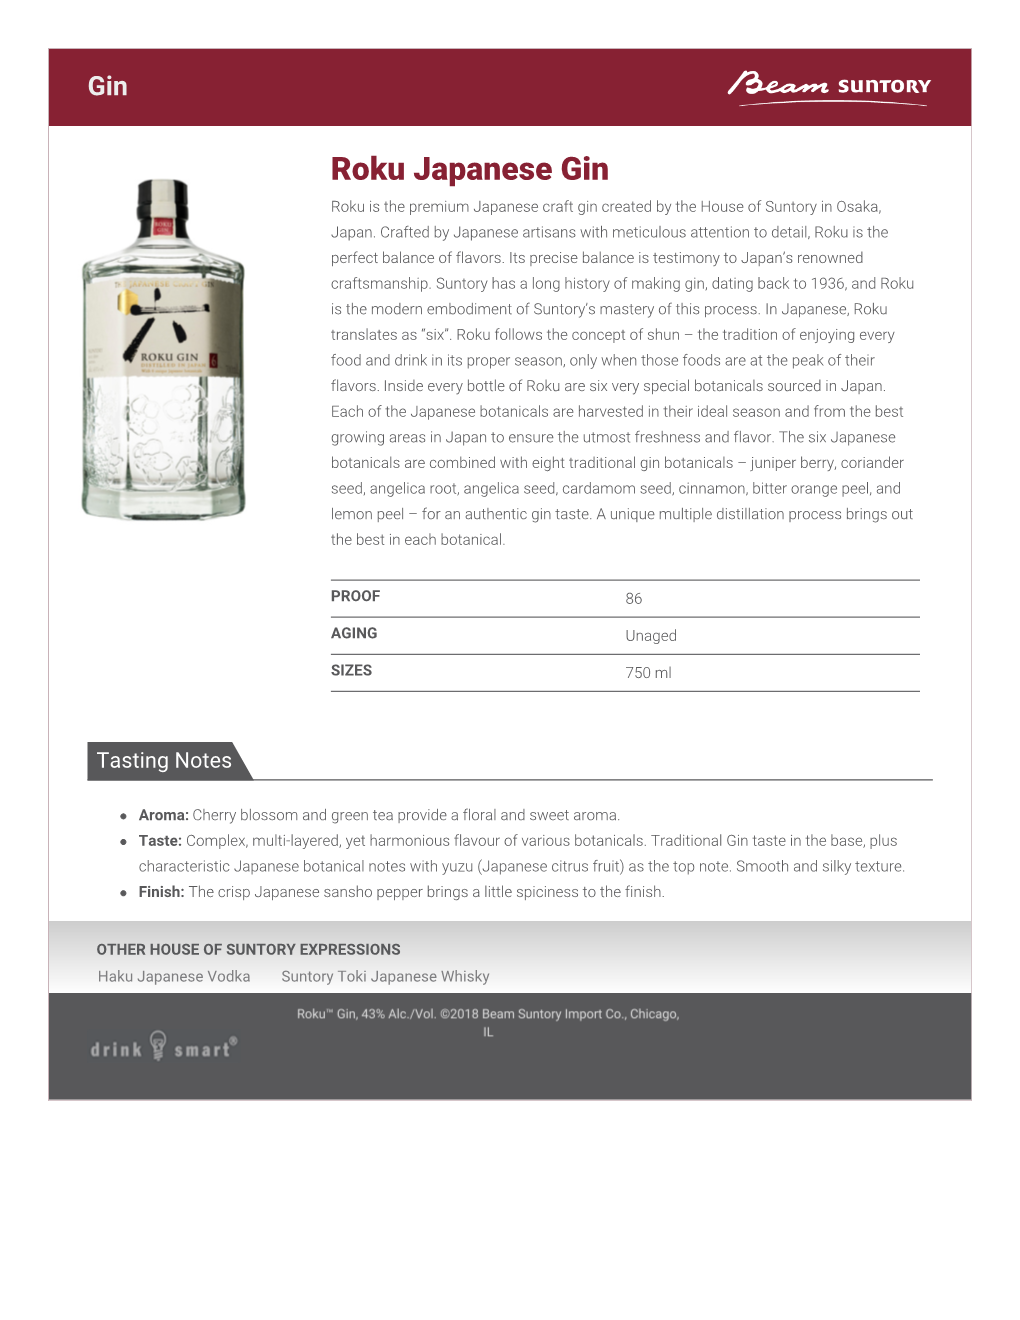 Roku Japanese Gin Roku Is the Premium Japanese Craft Gin Created by the House of Suntory in Osaka, Japan